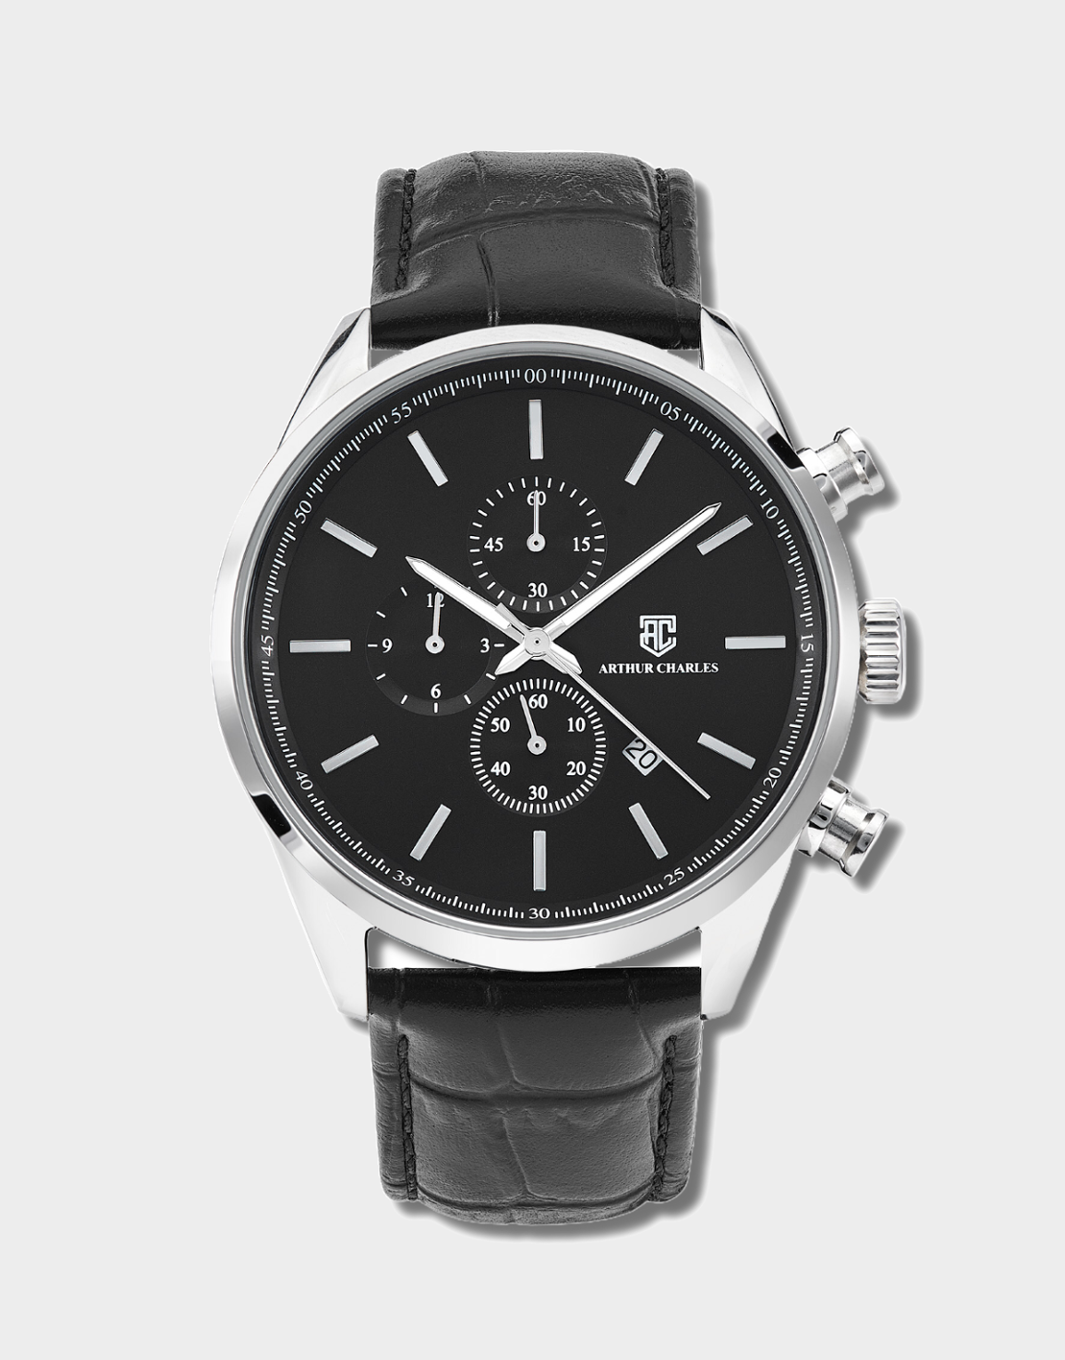 A front view of the men's Silver Chrono Prestige Watch by Arthur Charles. This watch has a black face with a silver dial and hands. The Arthur charles logo is displayed on the front and is also etched upon the crown. This timepiece features a chronograph movement.